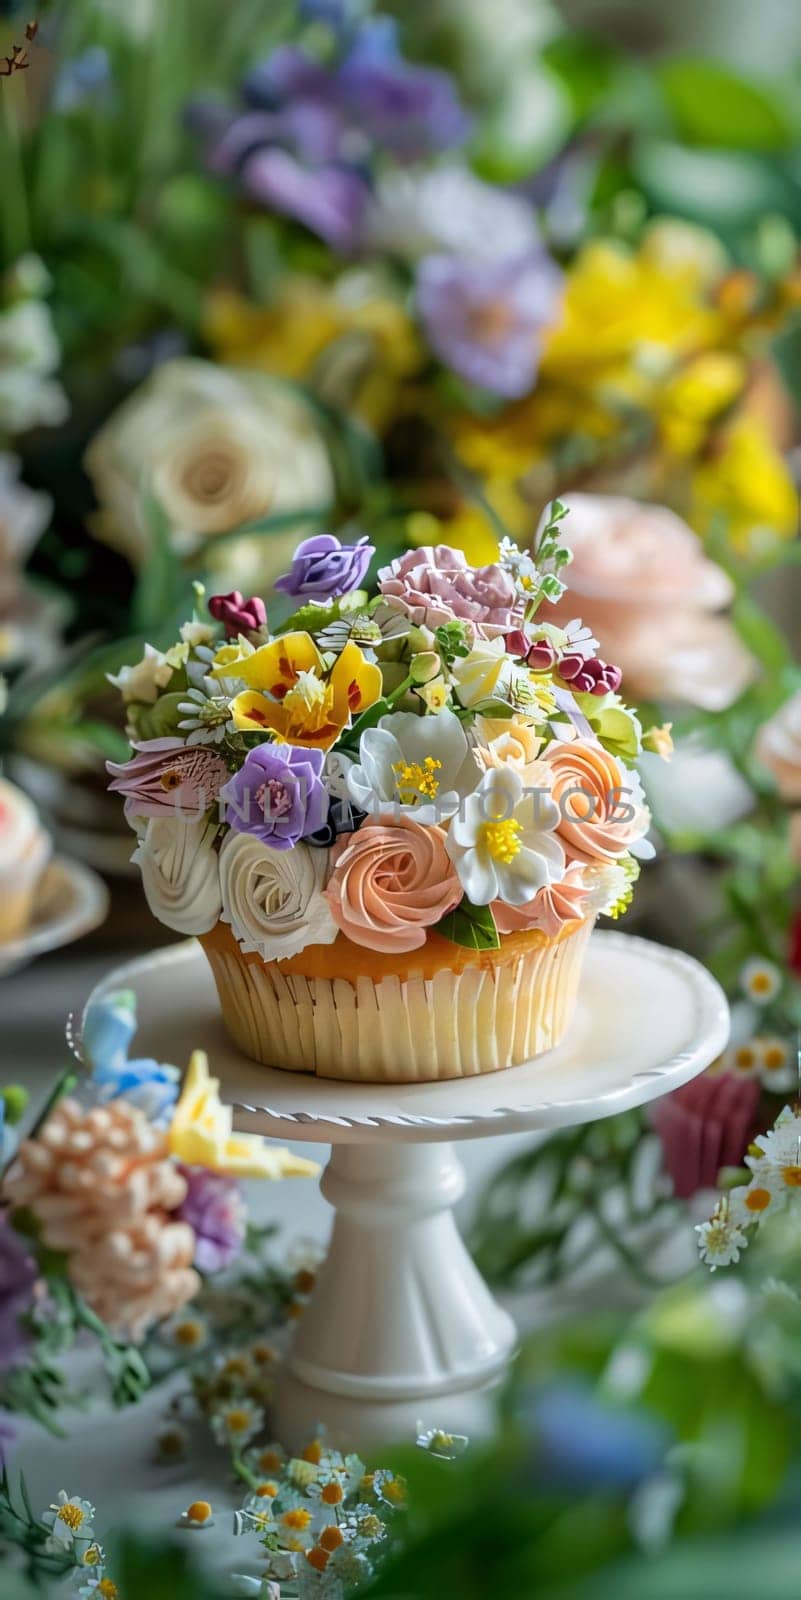 Cupcakes with flowers. Flowering flowers, a symbol of spring, new life. by ThemesS